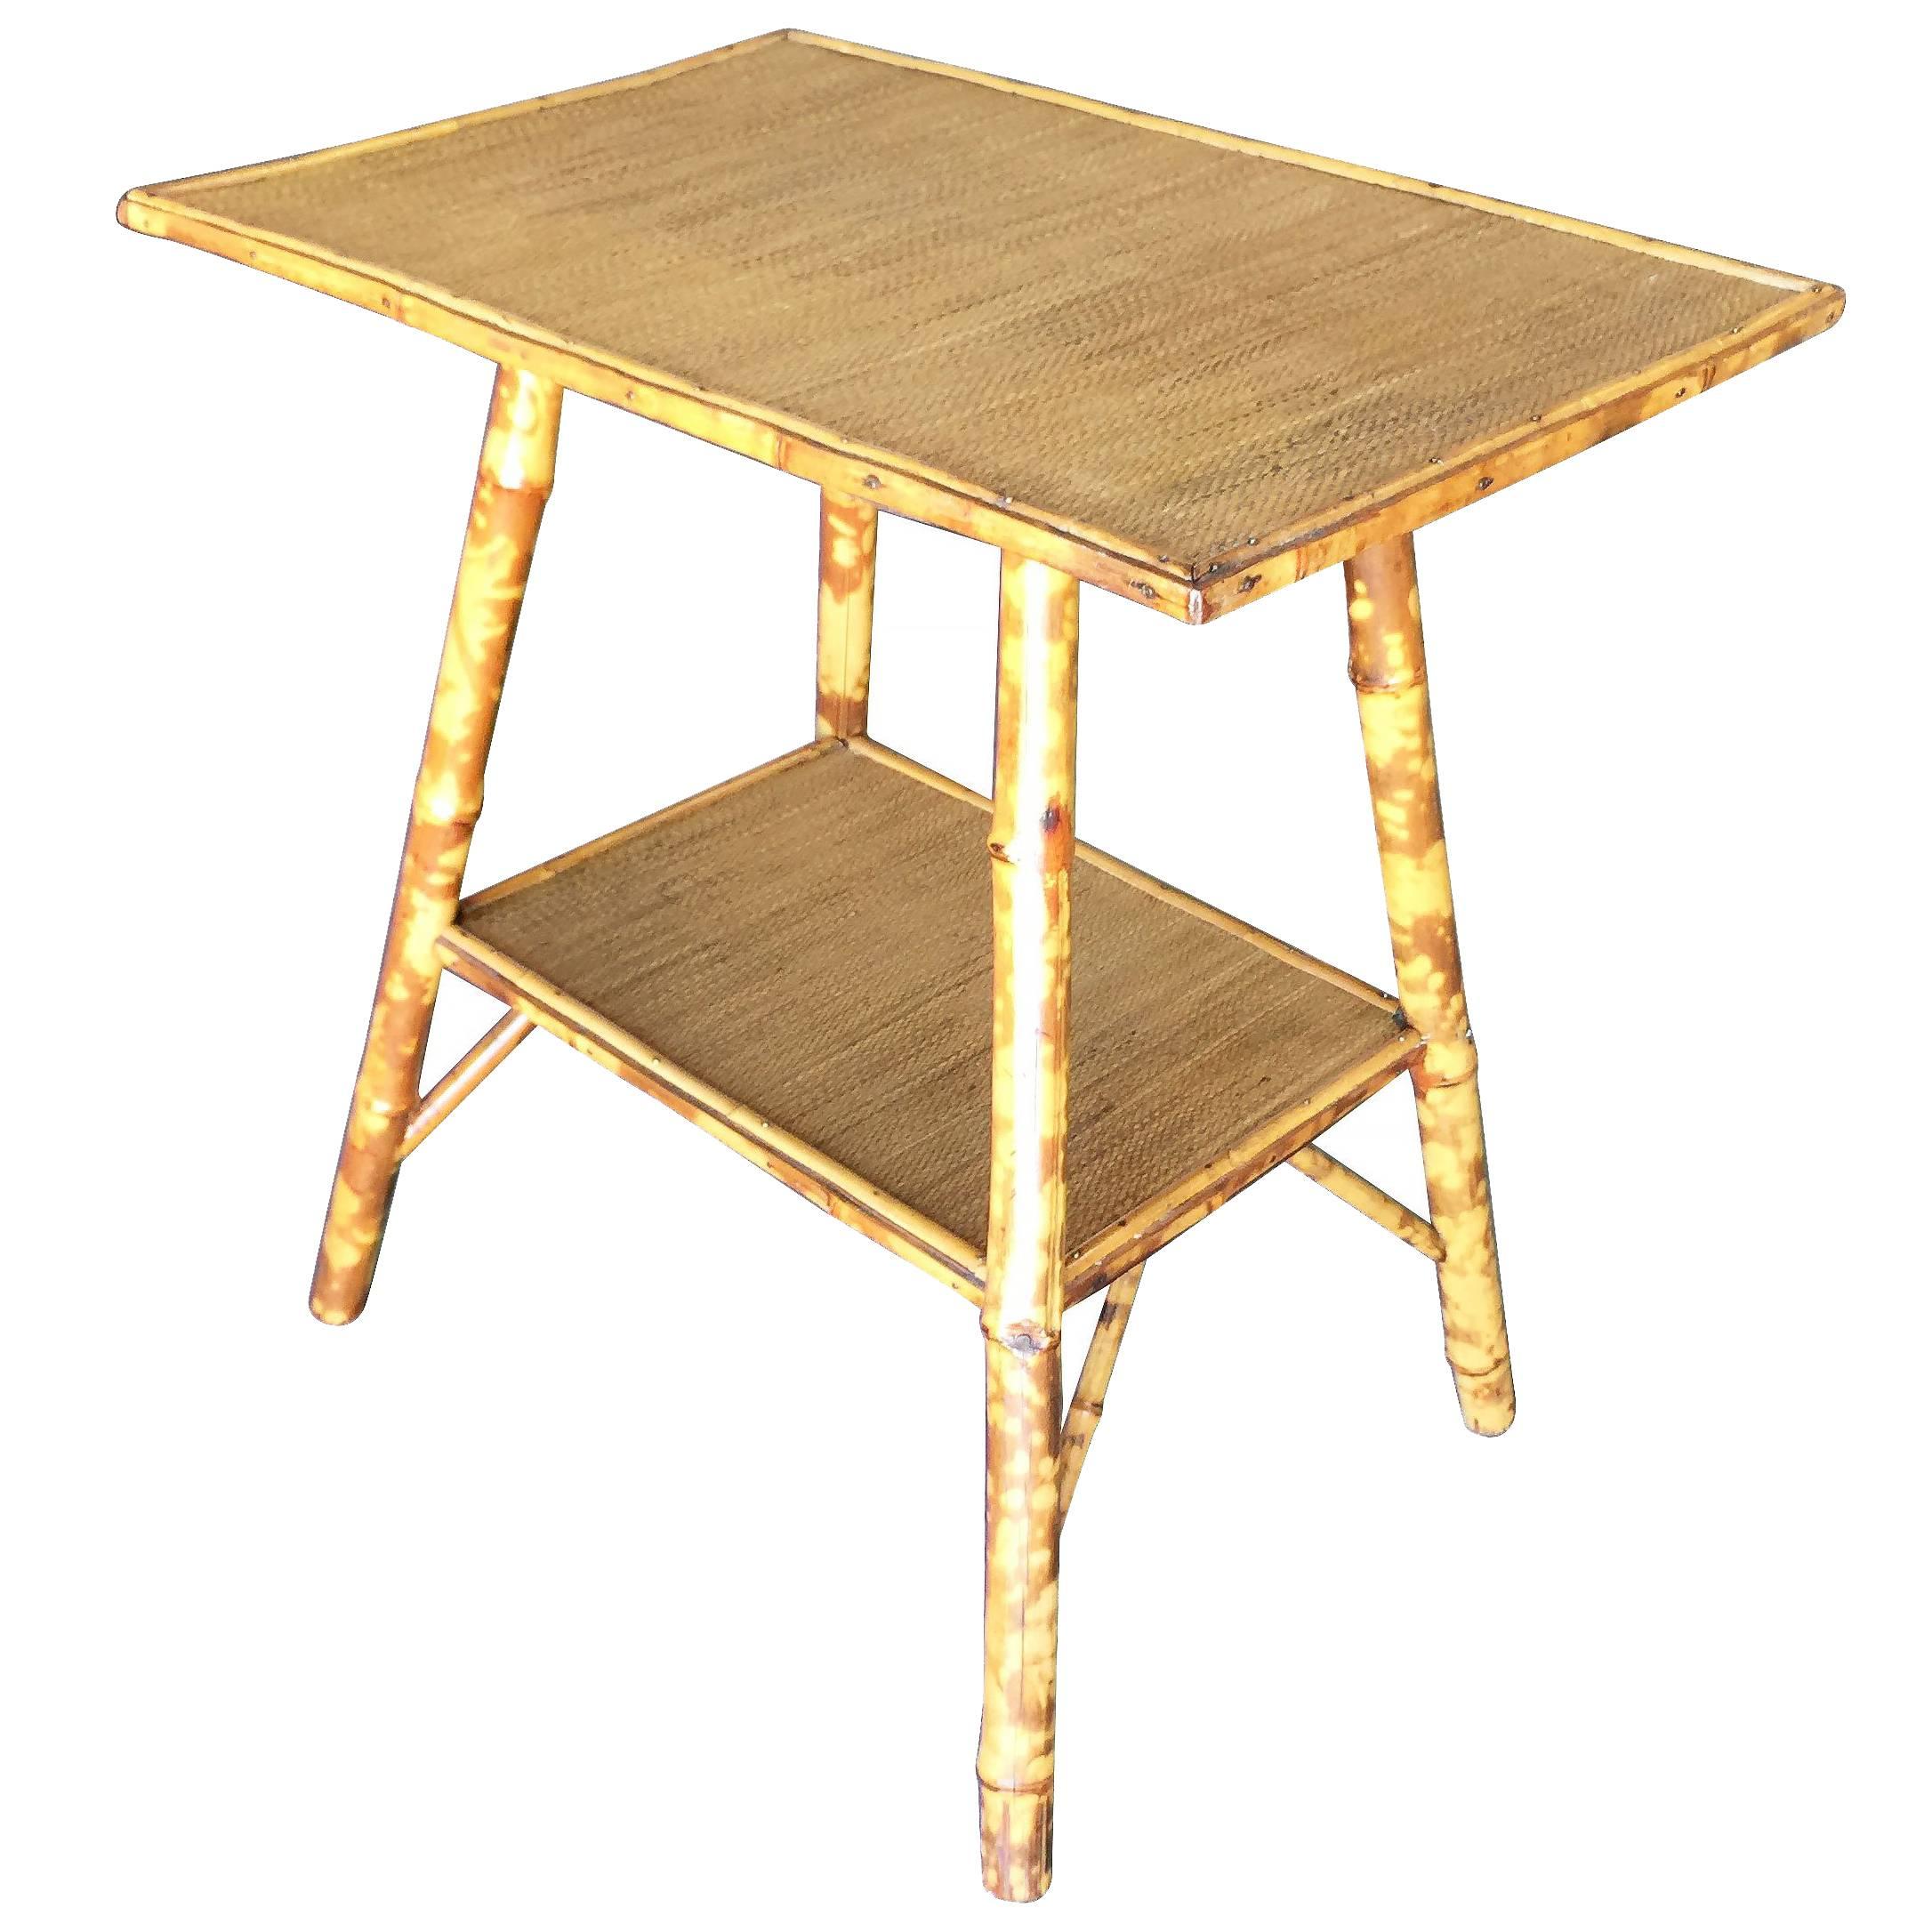 Pedestal Side Table with Tiger Bamboo Frame with Bottom Shelf